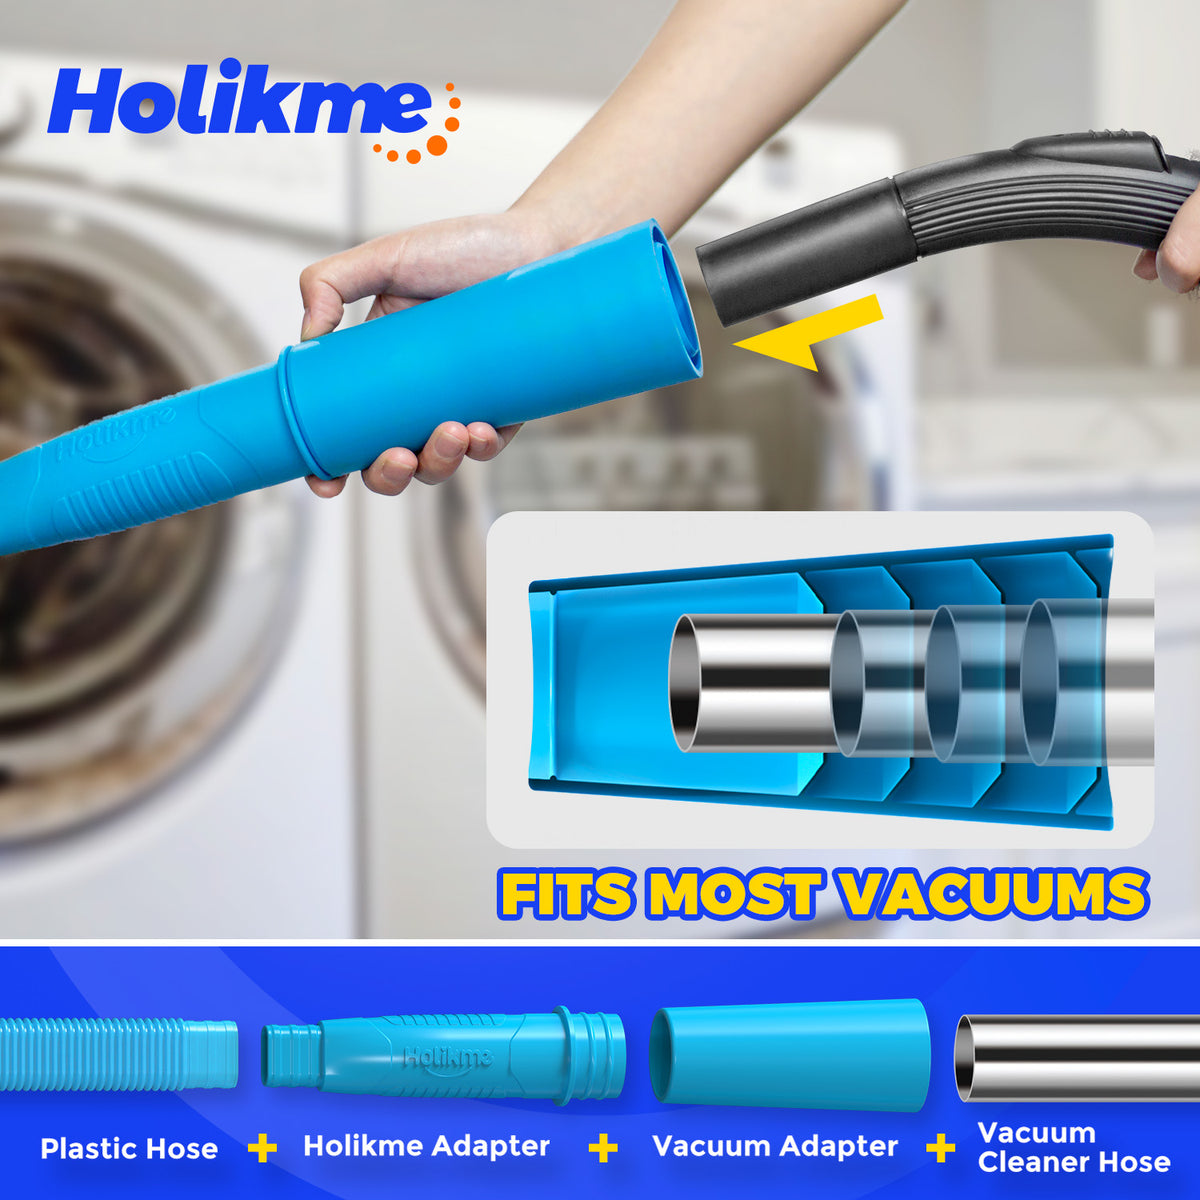 Holikme 30 Feet Dryer Vent Cleaner Kit,Flexible Lint Brush with Drill  Attachment, Extends Up to 30 Feet for Easy Cleaning, Synthetic Brush Head,  Use